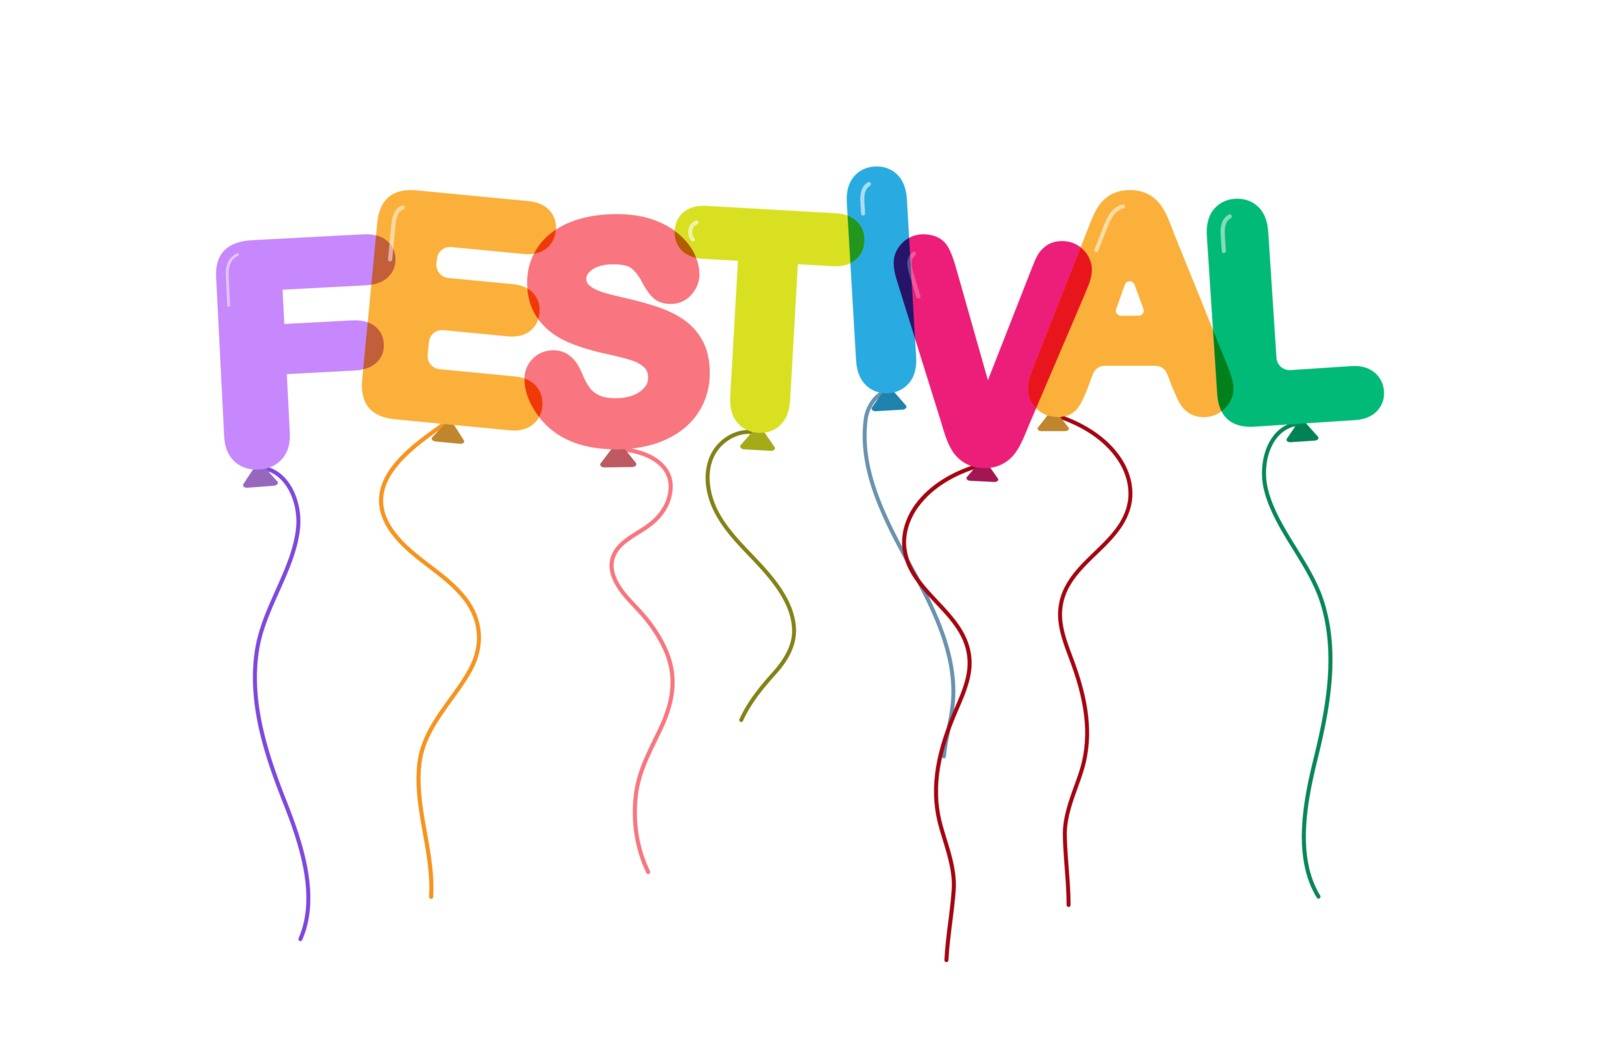 FESTIVAL. Balloons in the form of letters. Flat design
